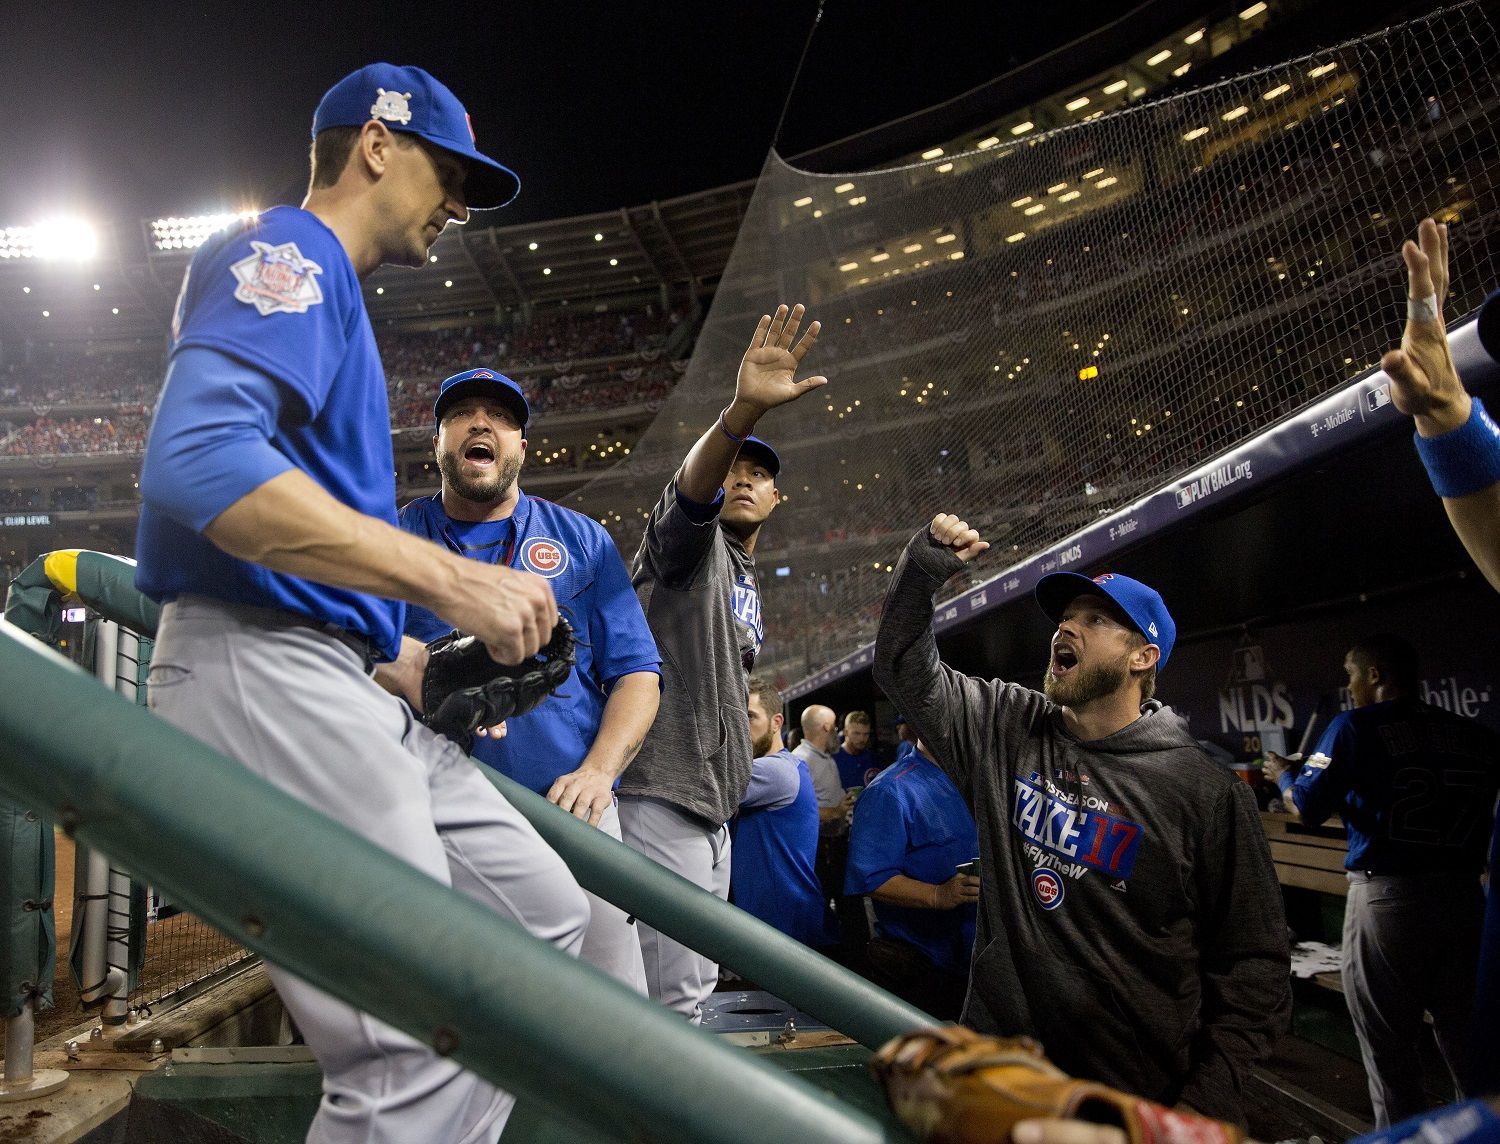 Chicago Cubs starting pitcher Kyle Hendricks, left, is greeted by teammates in the dugout at the end of the seventh inning in Game 1 of baseball's National League Division Series against the Washington Nationals at Nationals Park, Friday, Oct. 6, 2017, in Washington. (AP Photo/Pablo Martinez Monsivais)